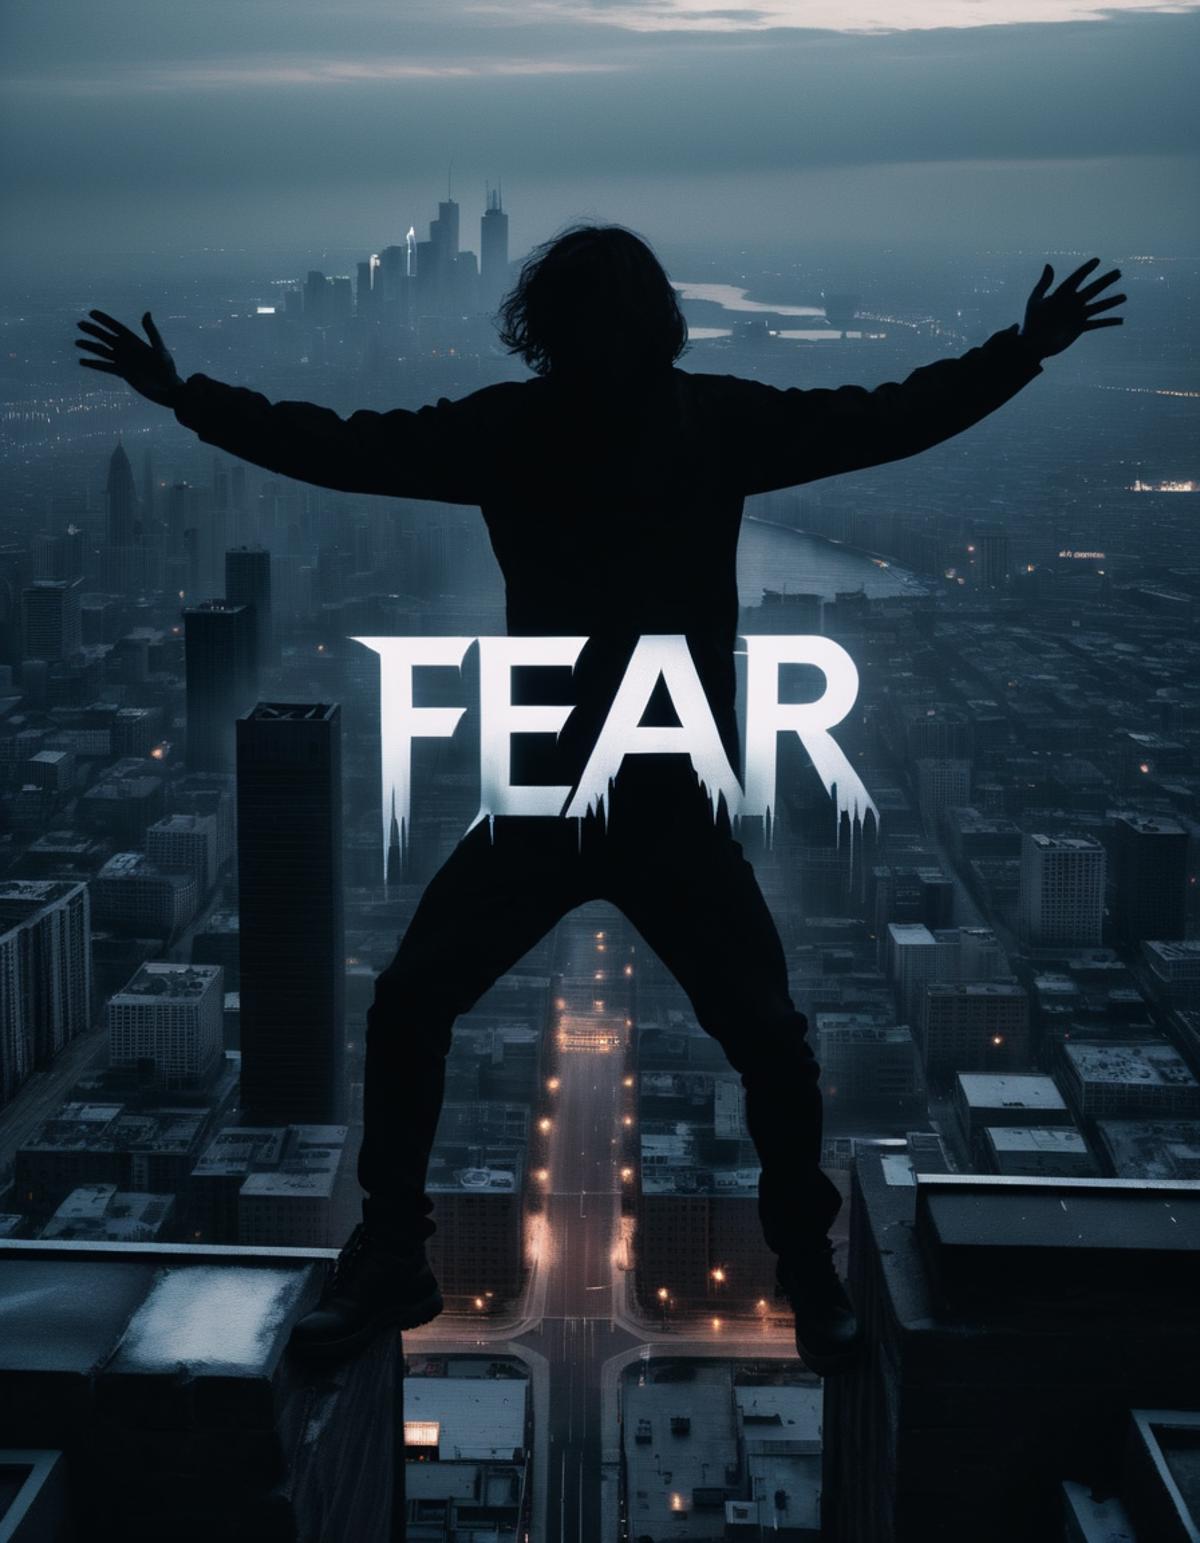 A man standing on the edge of a skyscraper with the word "Fear" written in front of him.